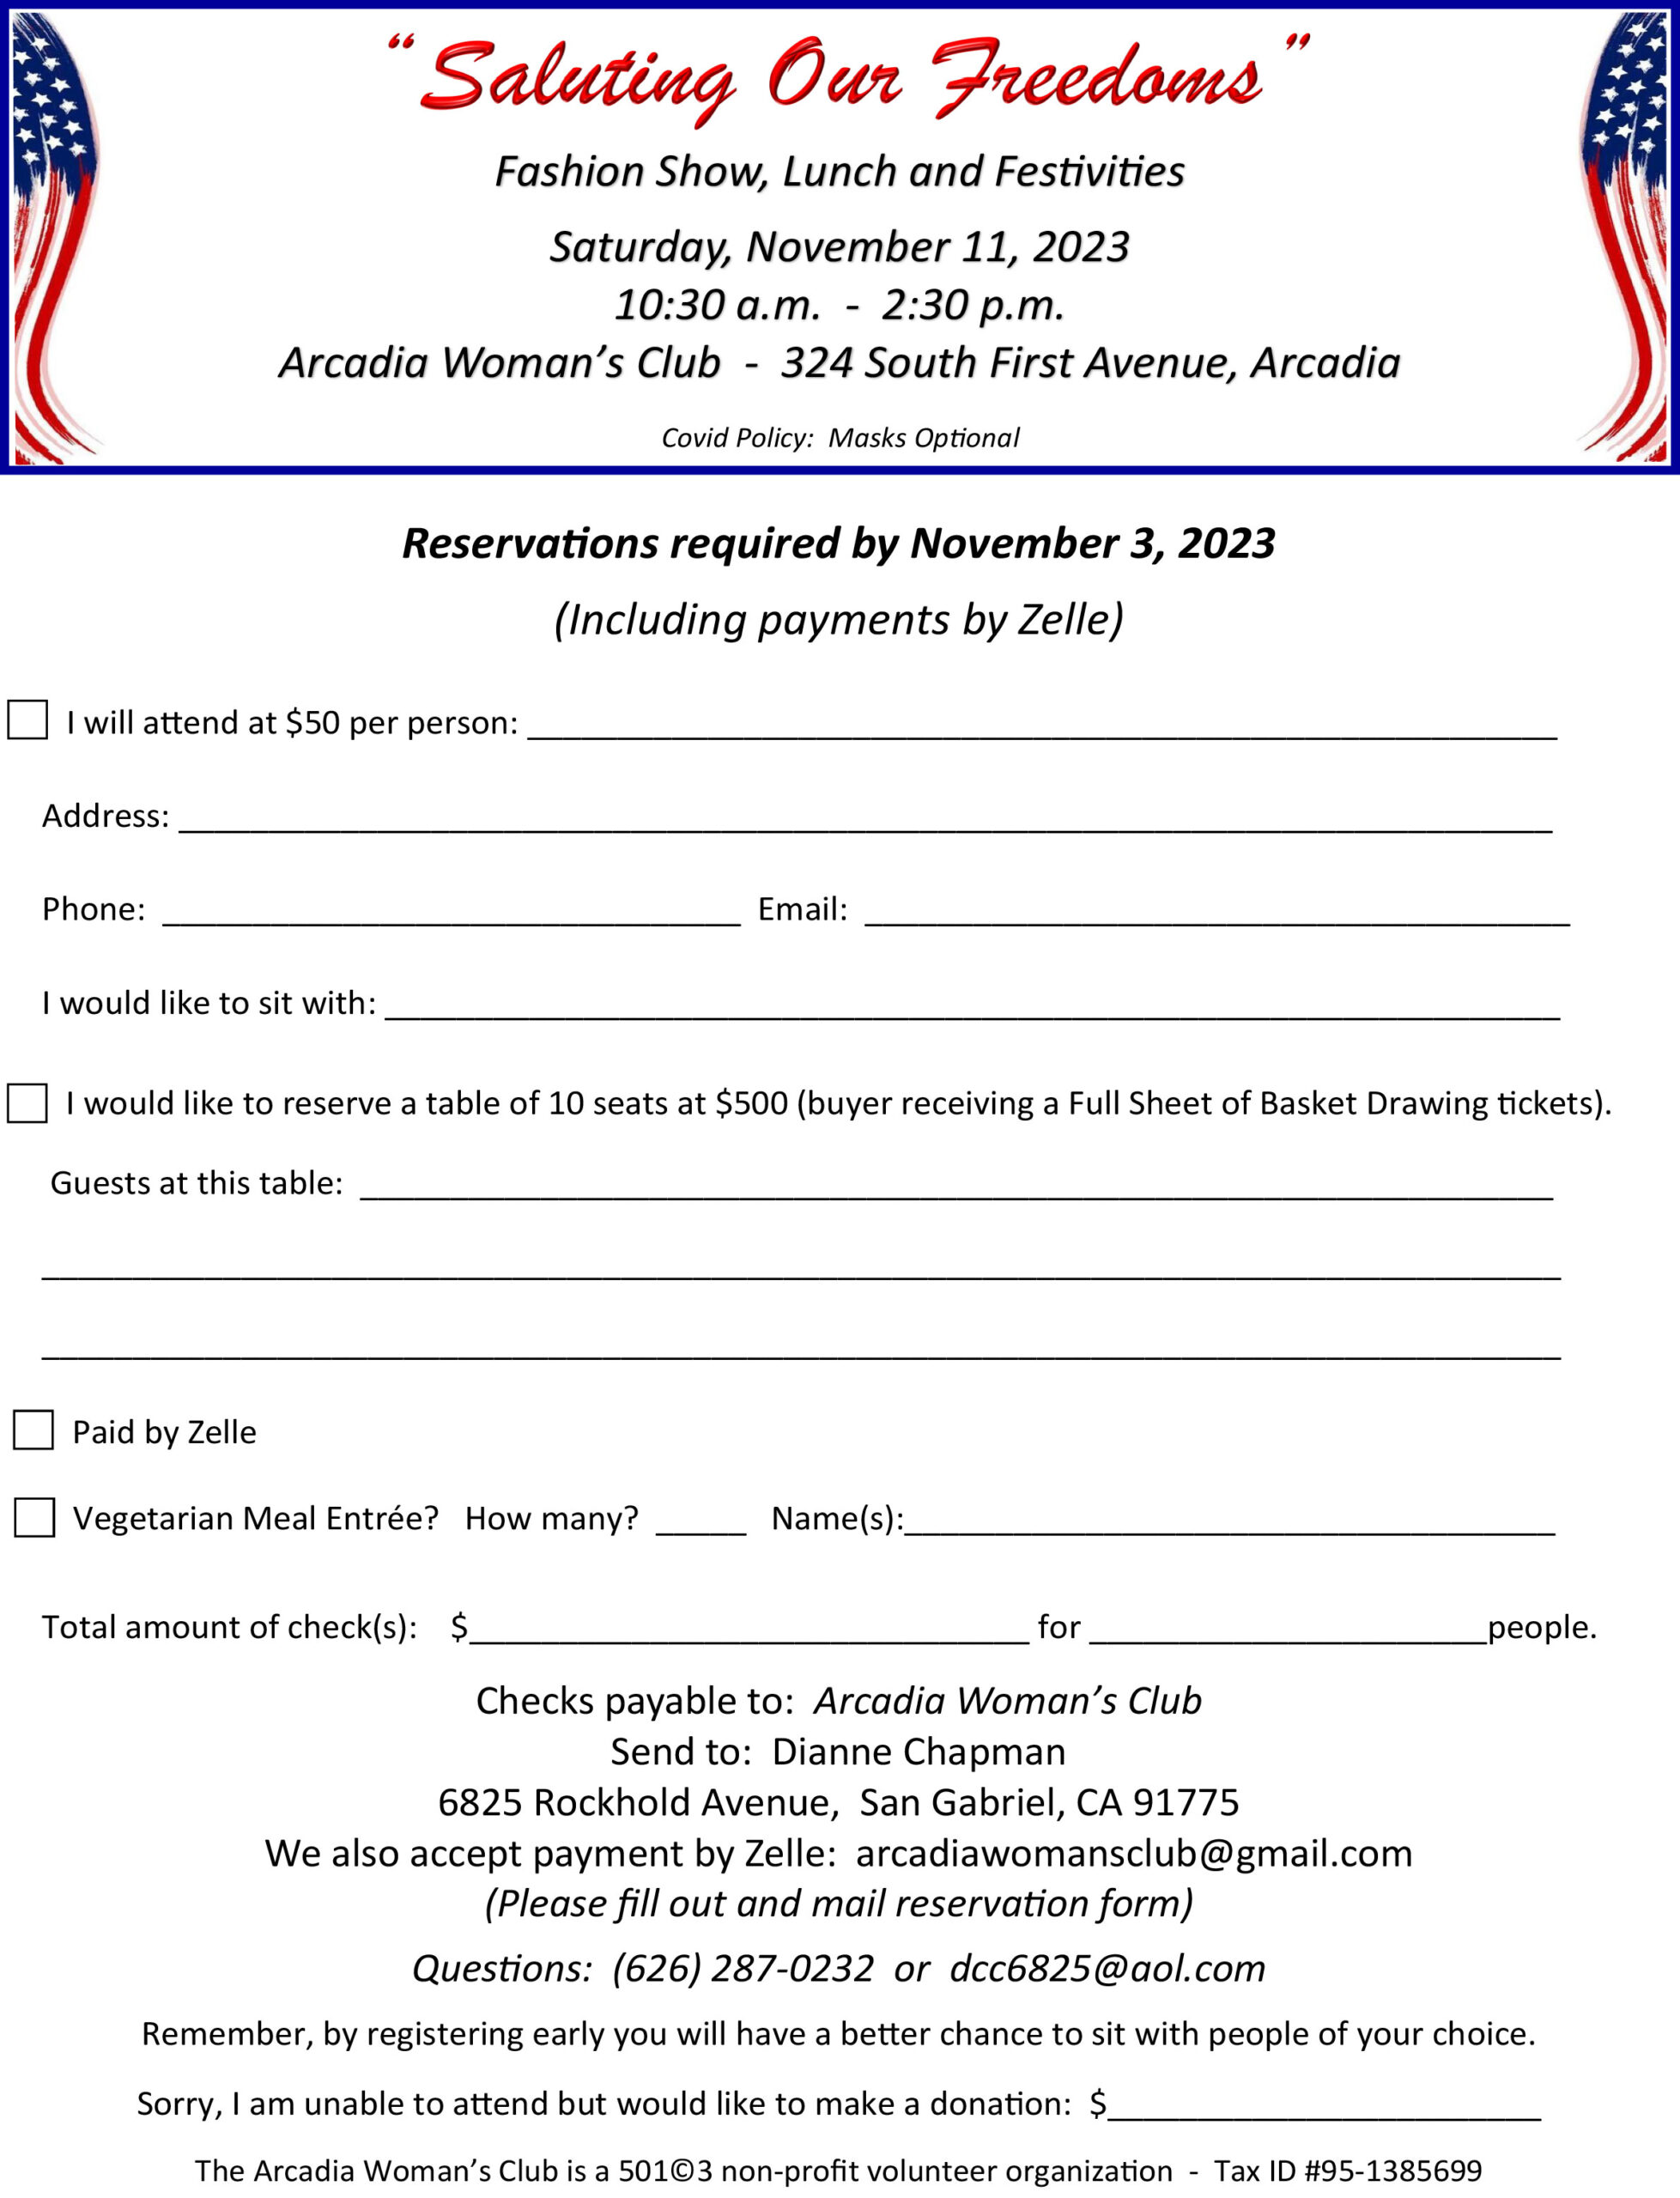 Saluting Our Freedoms Fashion Show with Arcadia Woman's Club sign up form